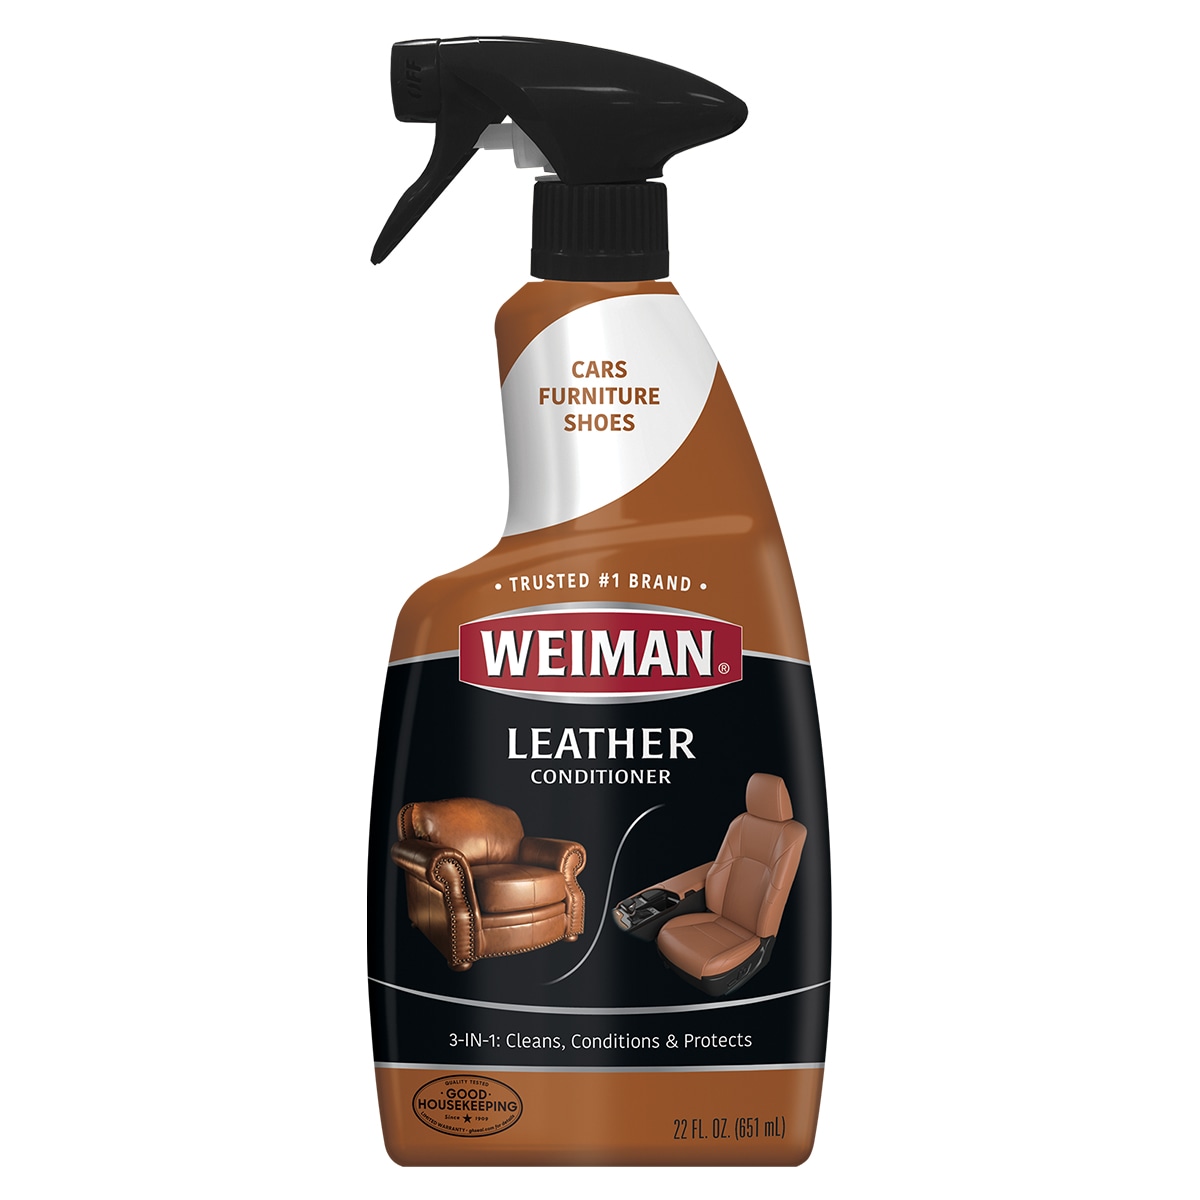  Weiman Stainless Steel Cleaner Kit - Fingerprint Resistant,  Removes Residue, Water Marks and Grease from Appliances Works Great on  Refrigerators, Dishwashers, Ovens, Grills Packaging May Vary : Health &  Household